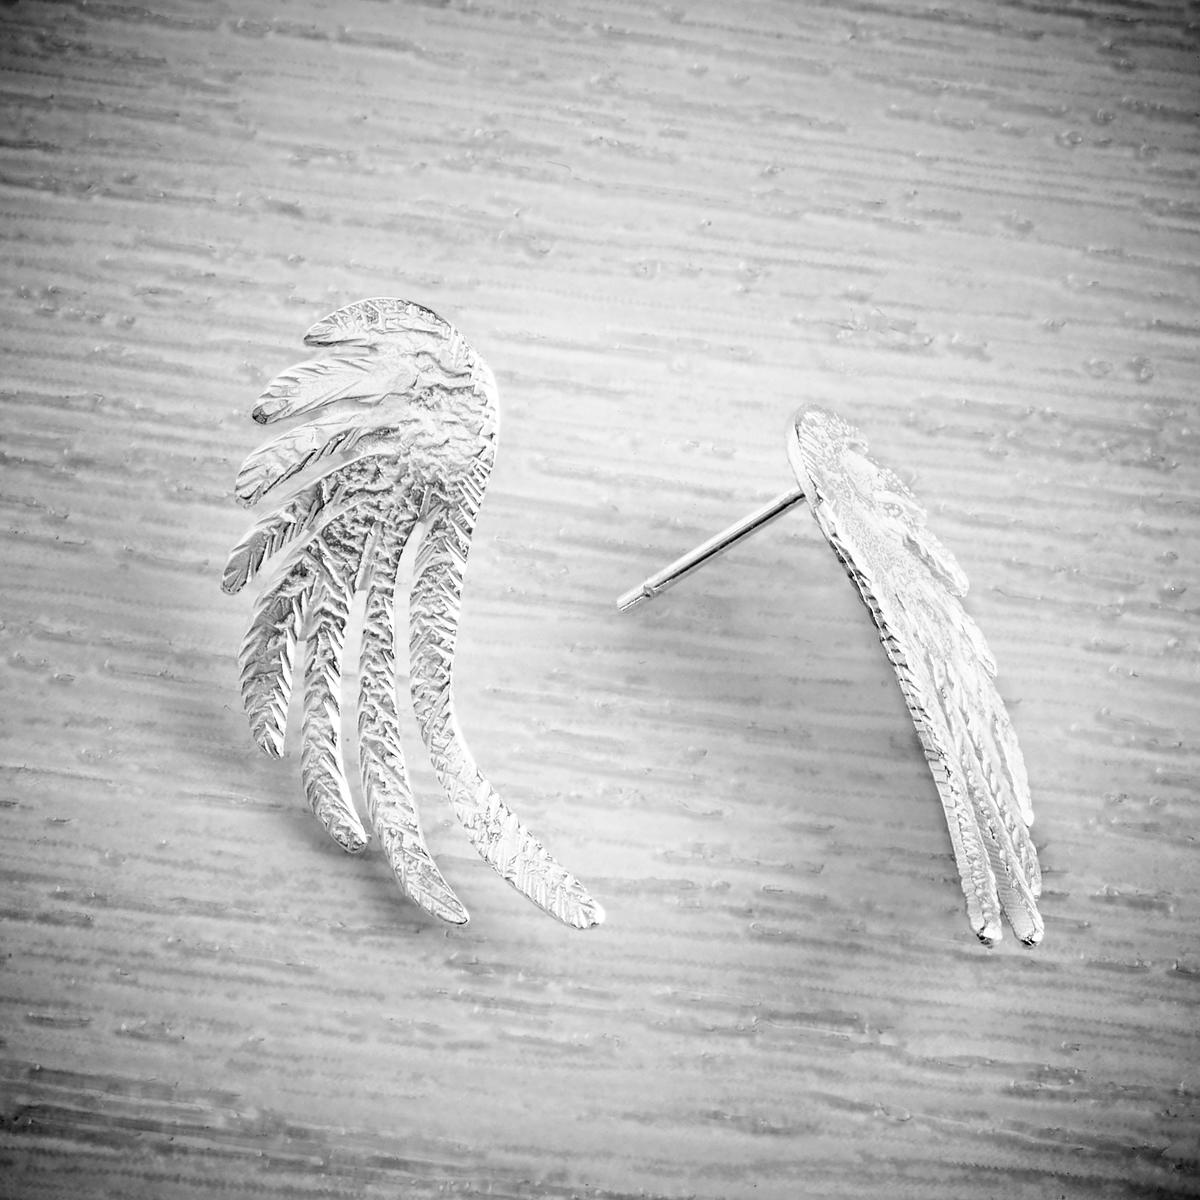 large silver stud angel wing earrings by Fi Mehra available at THE JEWELLERY MAKERS, image property of EMMA WHITE-1